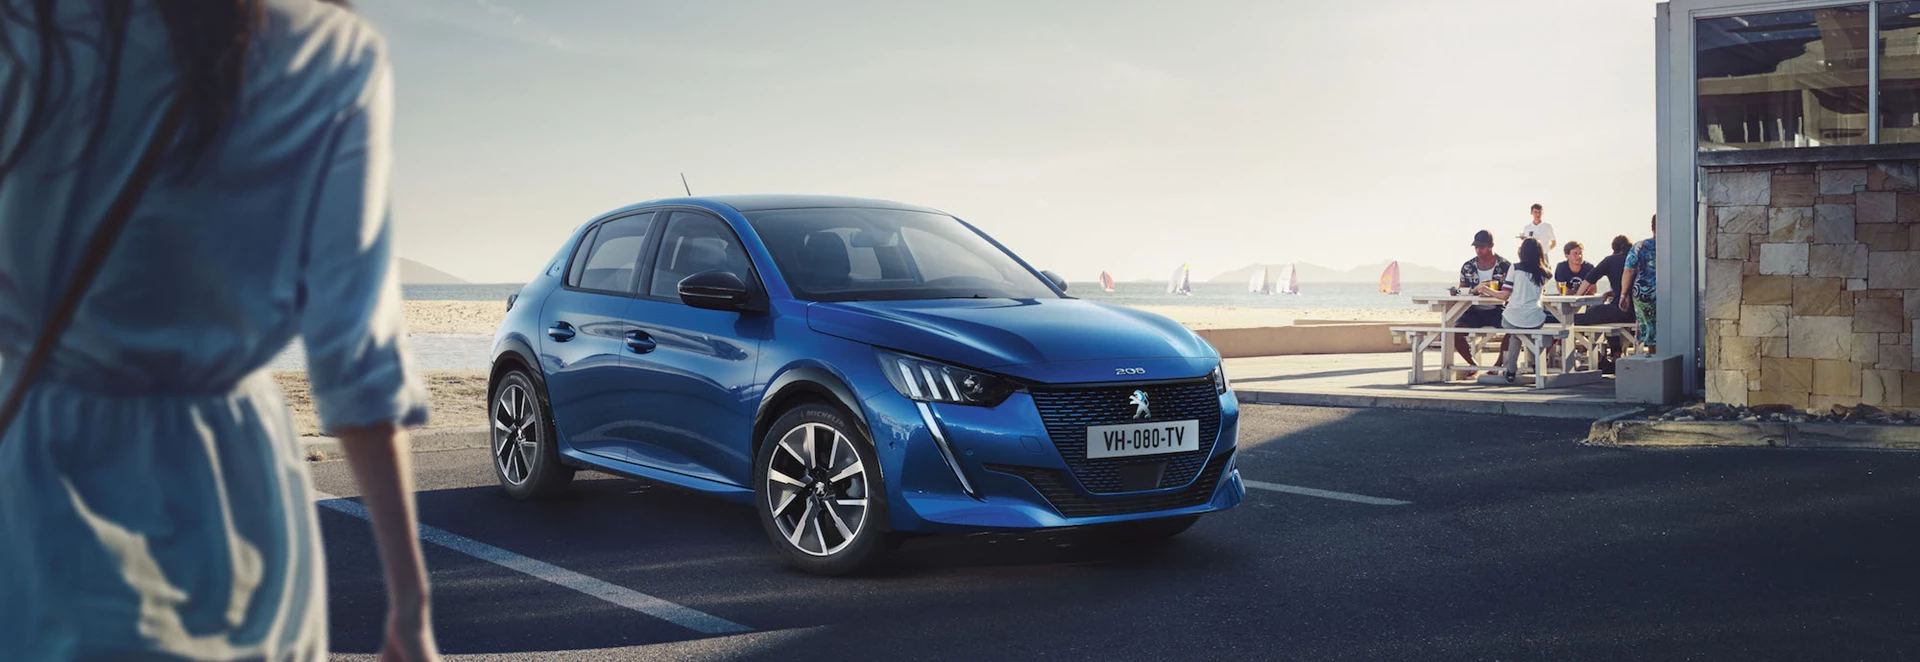 Reservations open for new electric Peugeot e-208